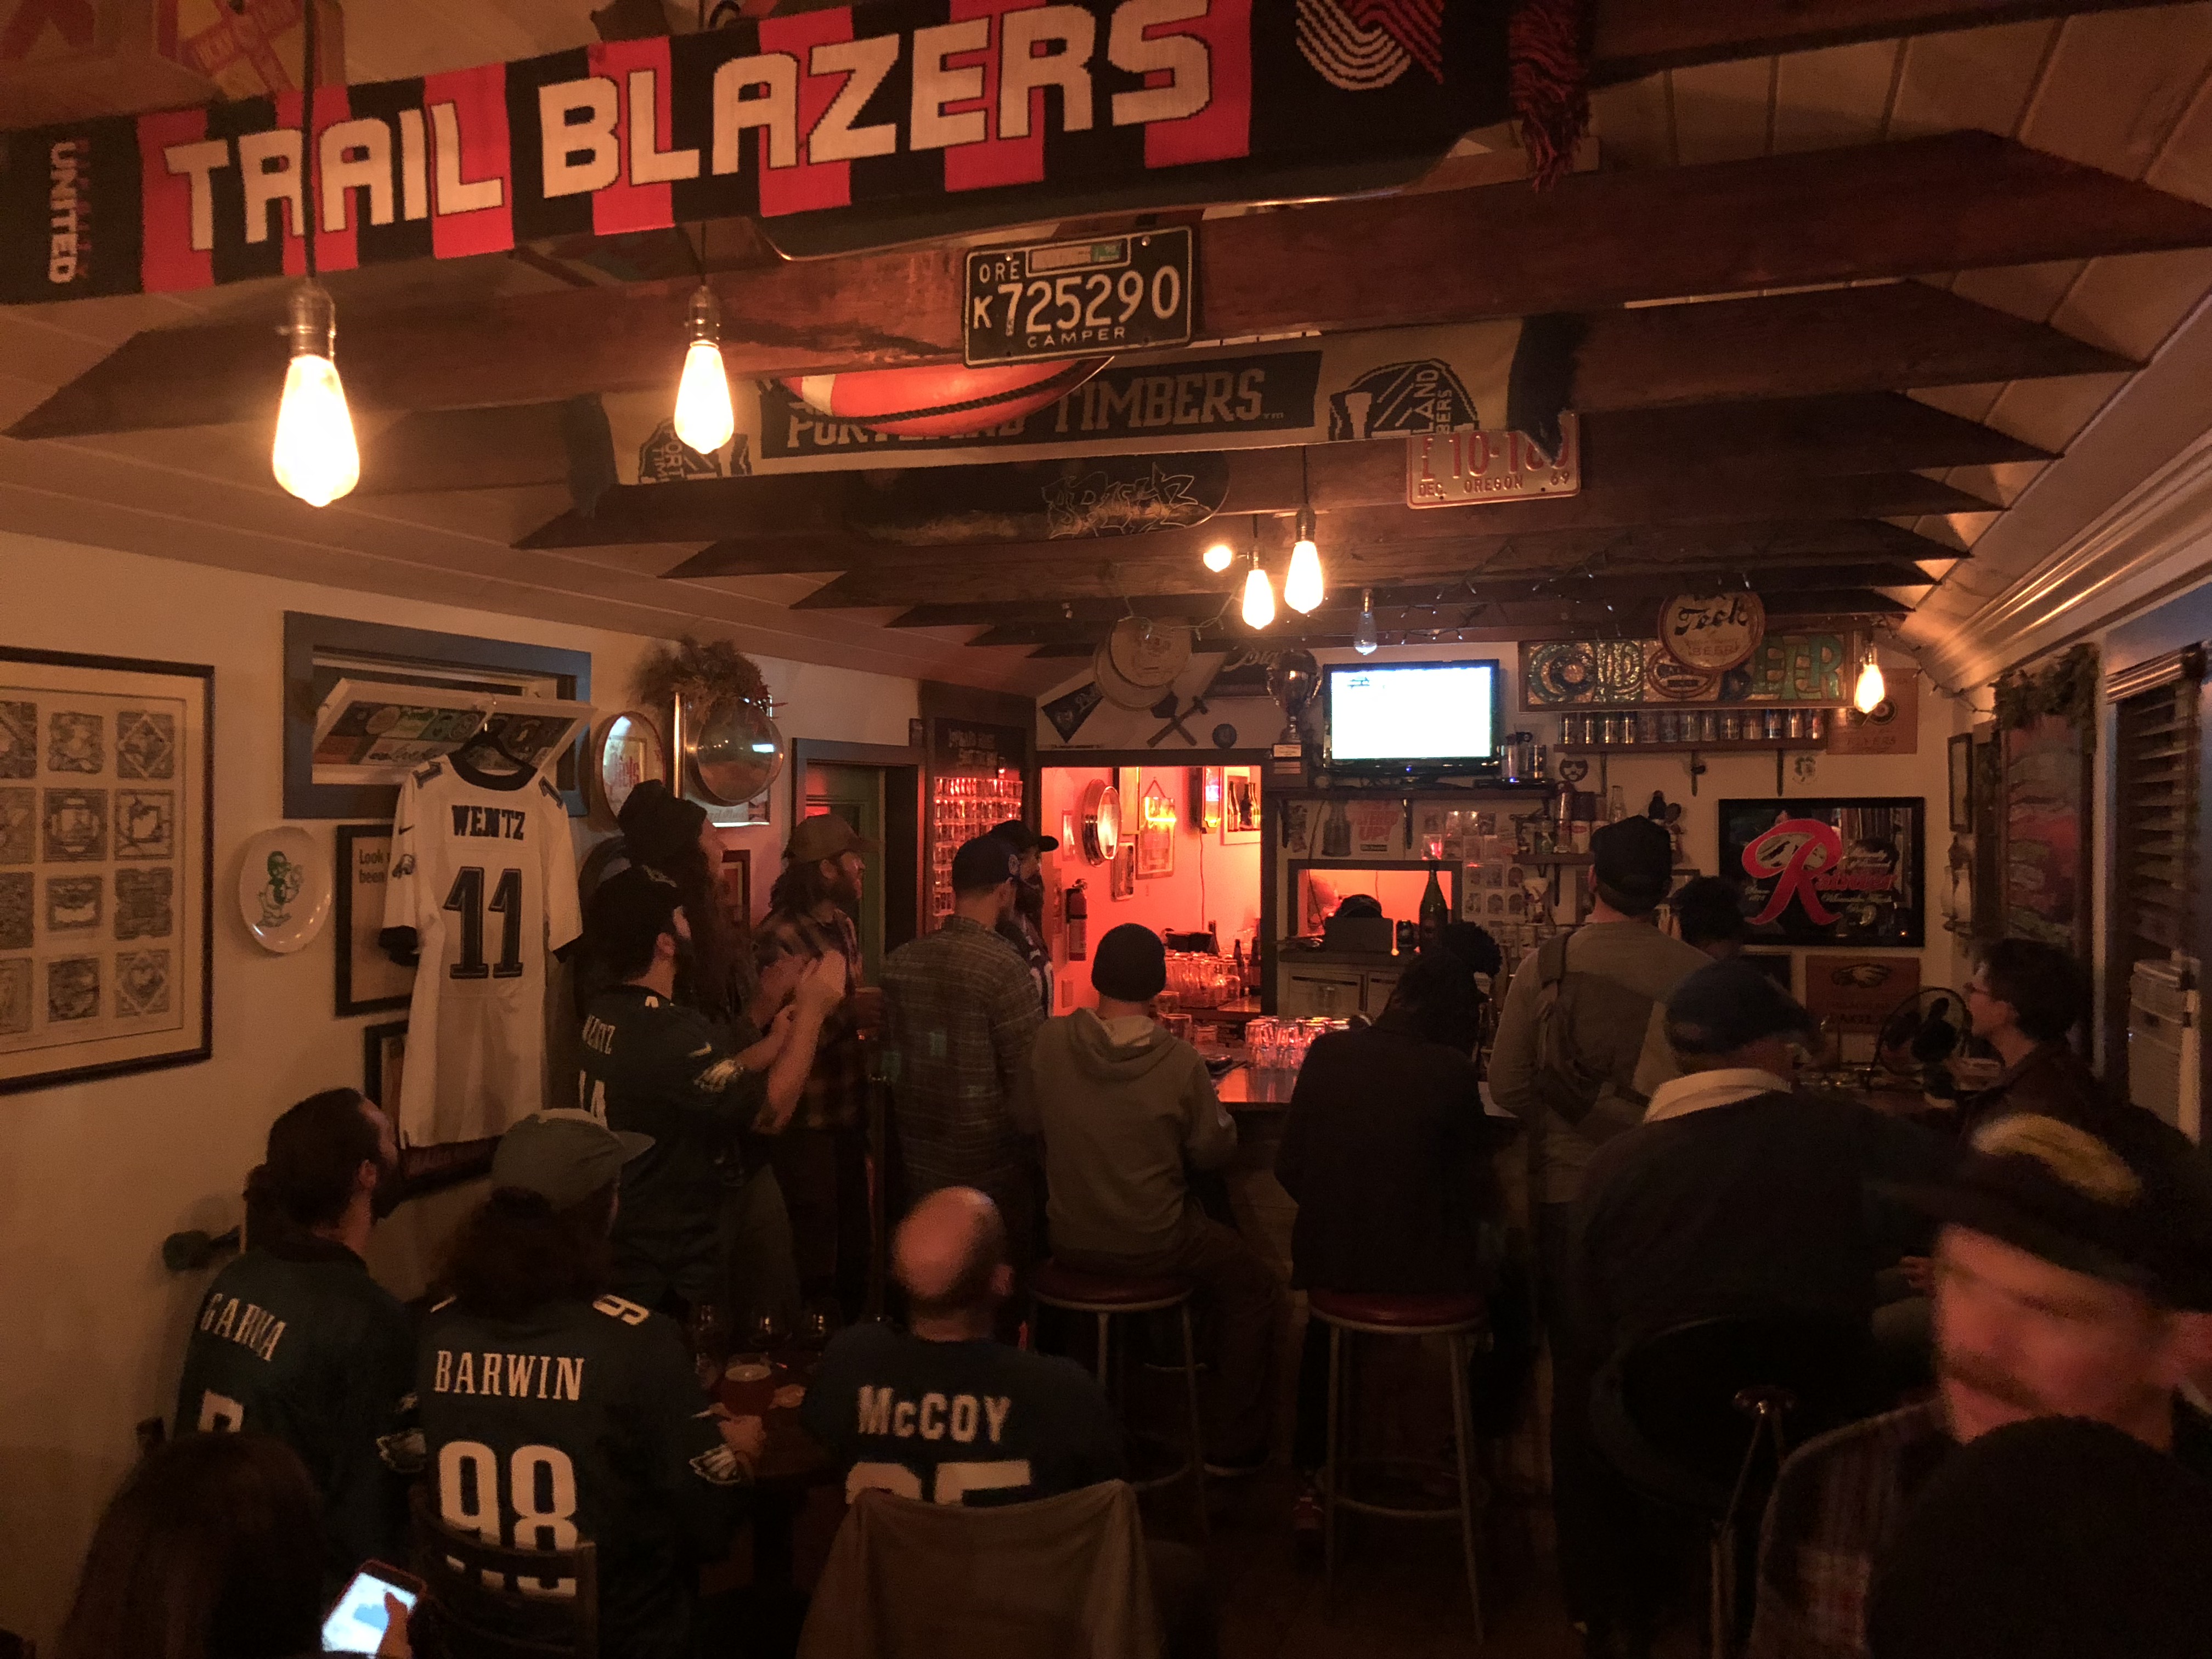 A new event during 2017 Killer Beer Week was held at Lombard House for Killer Case of the Mondays. This cozy bar is also home to viewing Philadelphia Eagles games.